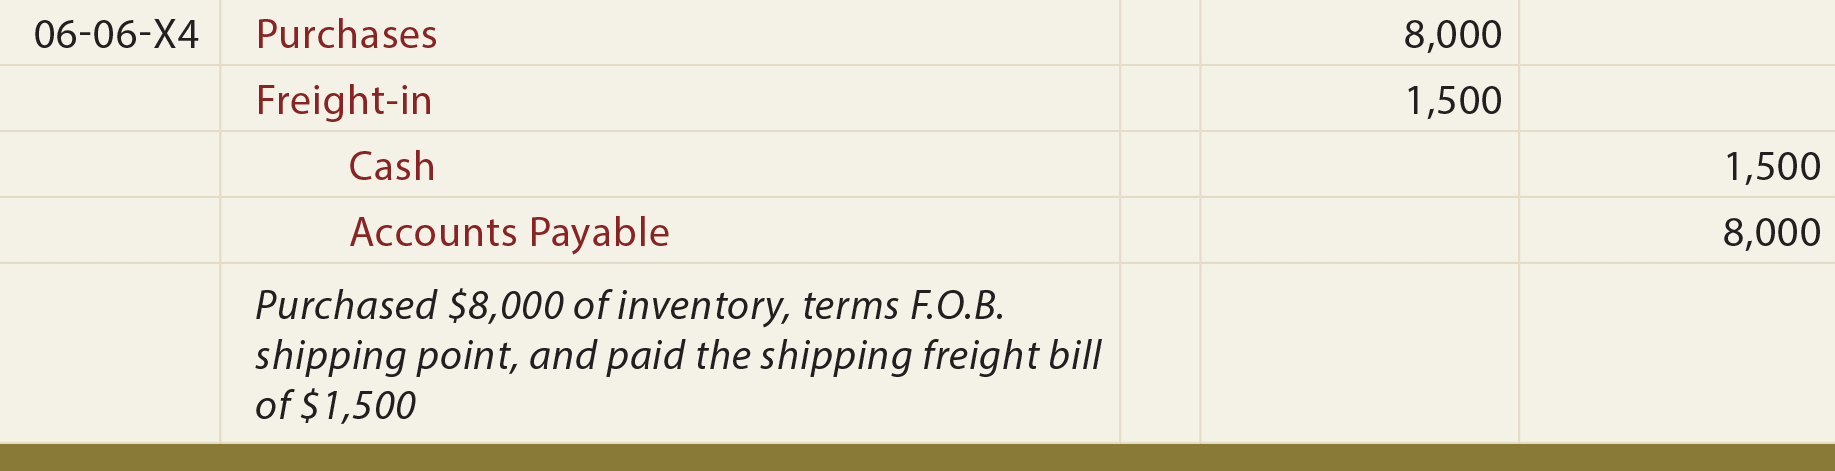 F.O.B. Shipping Point Seller's General Journal Entry